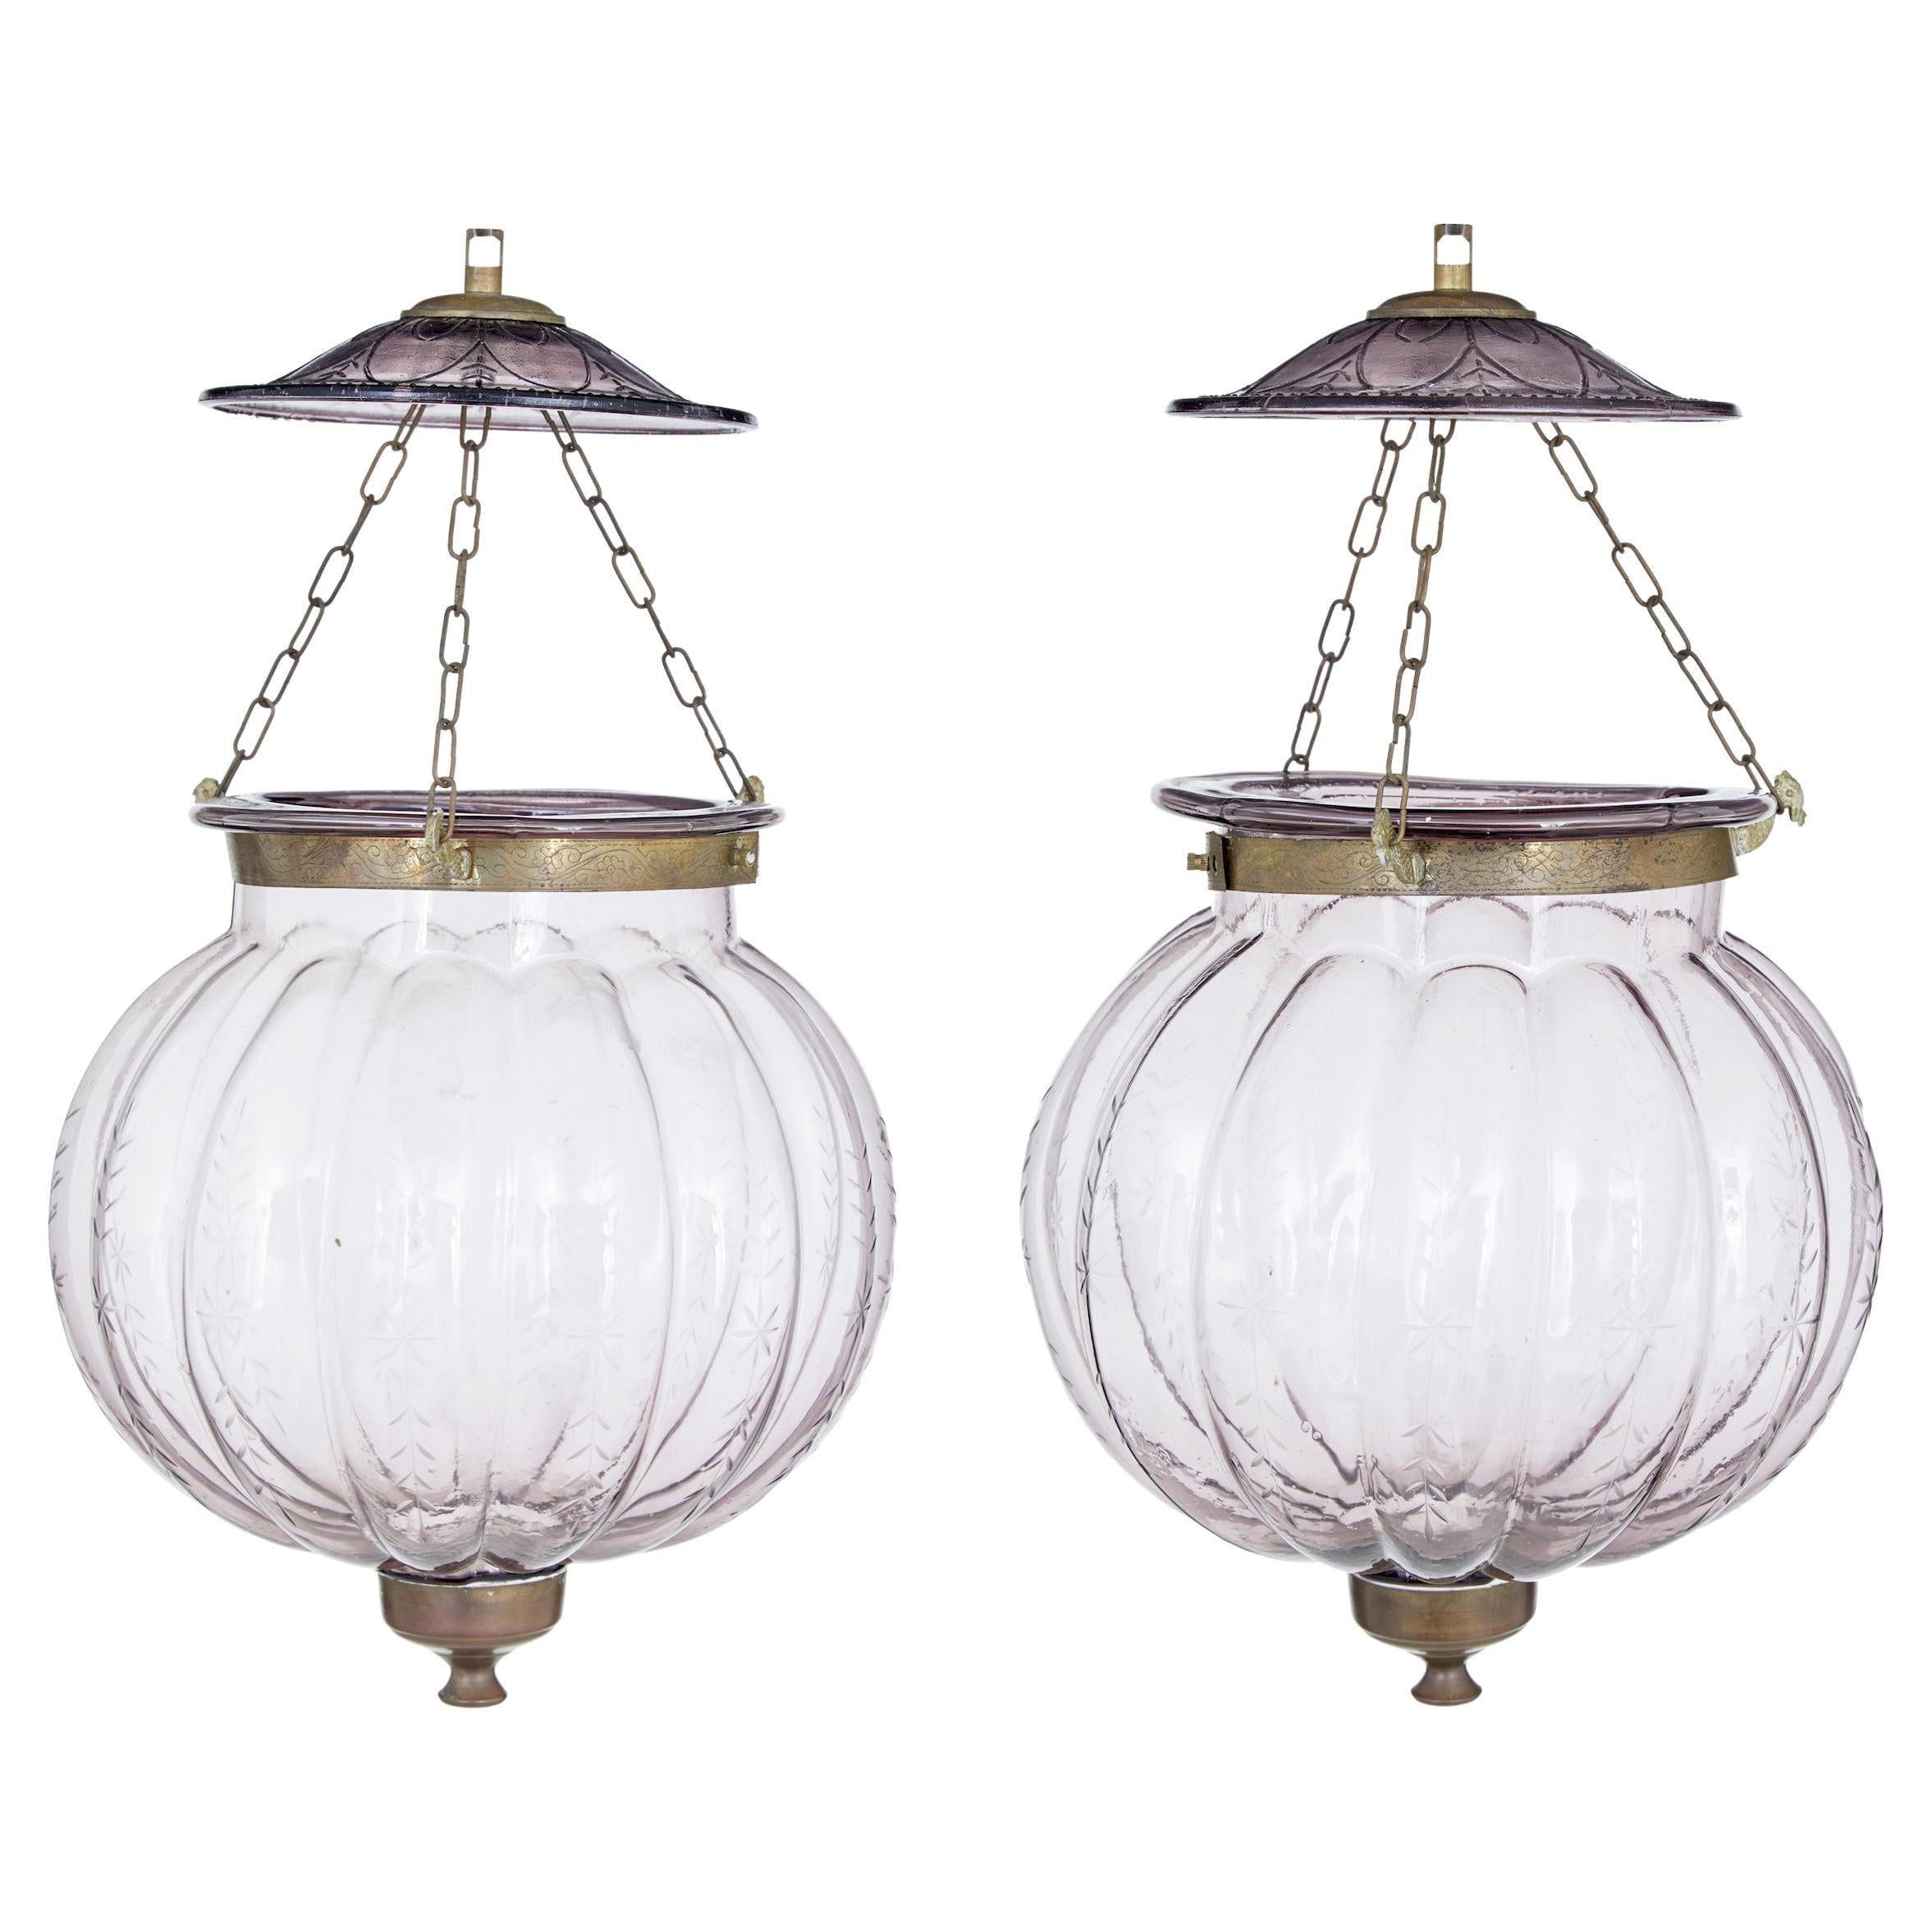 Pair of Early 20th Century French Glass Hanging Lanterns